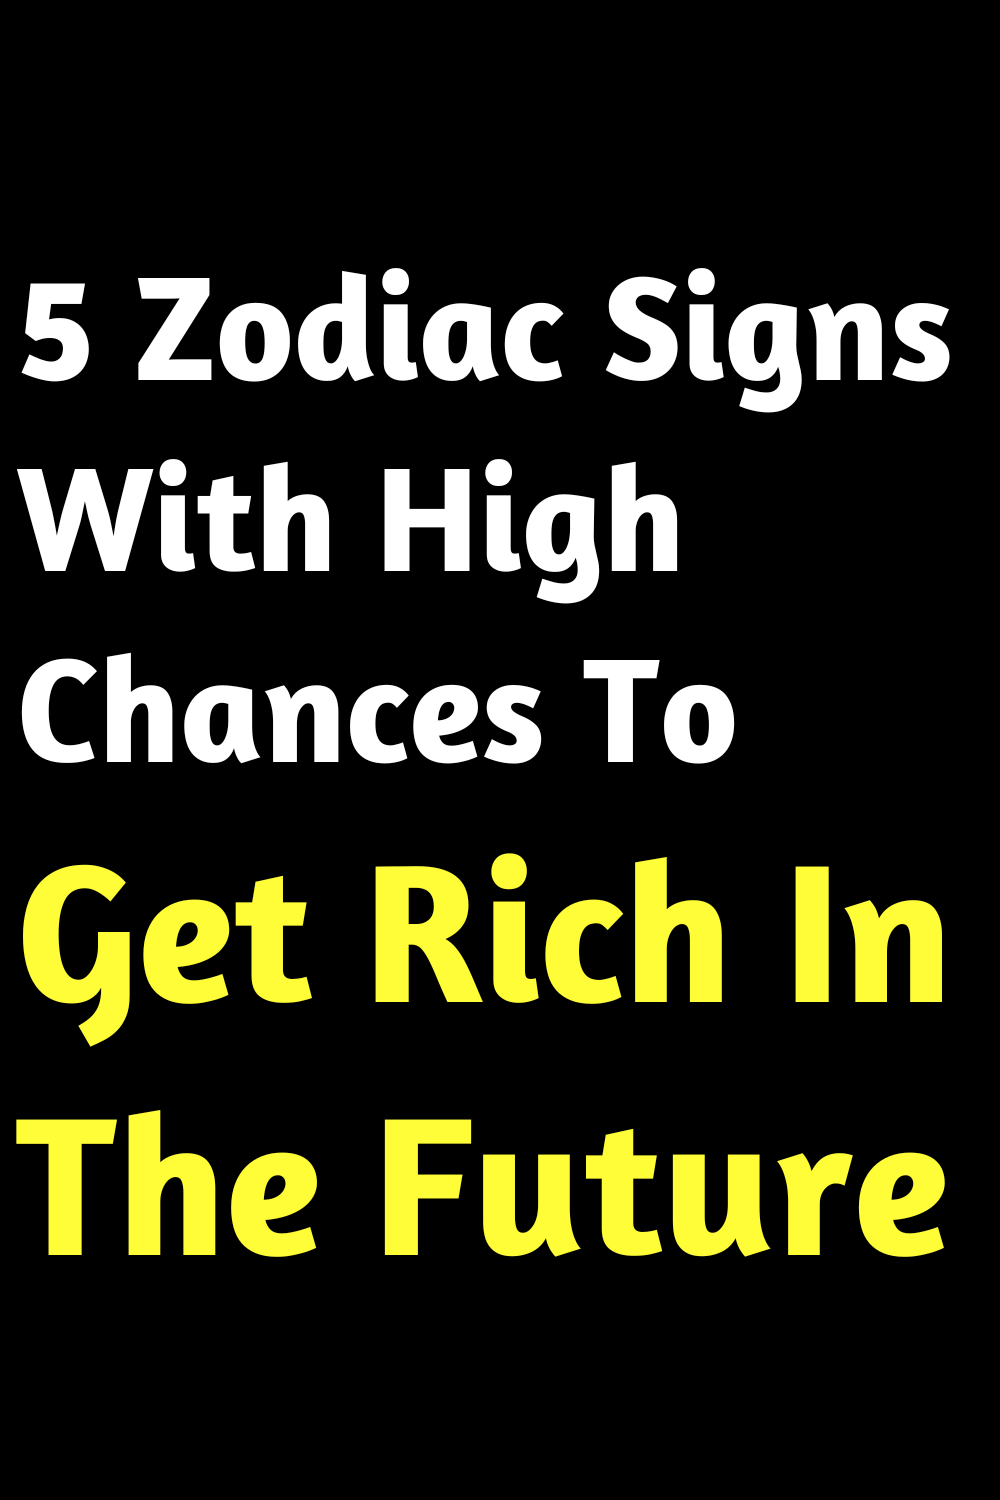 5 Zodiac Signs With High Chances To Get Rich In The Future